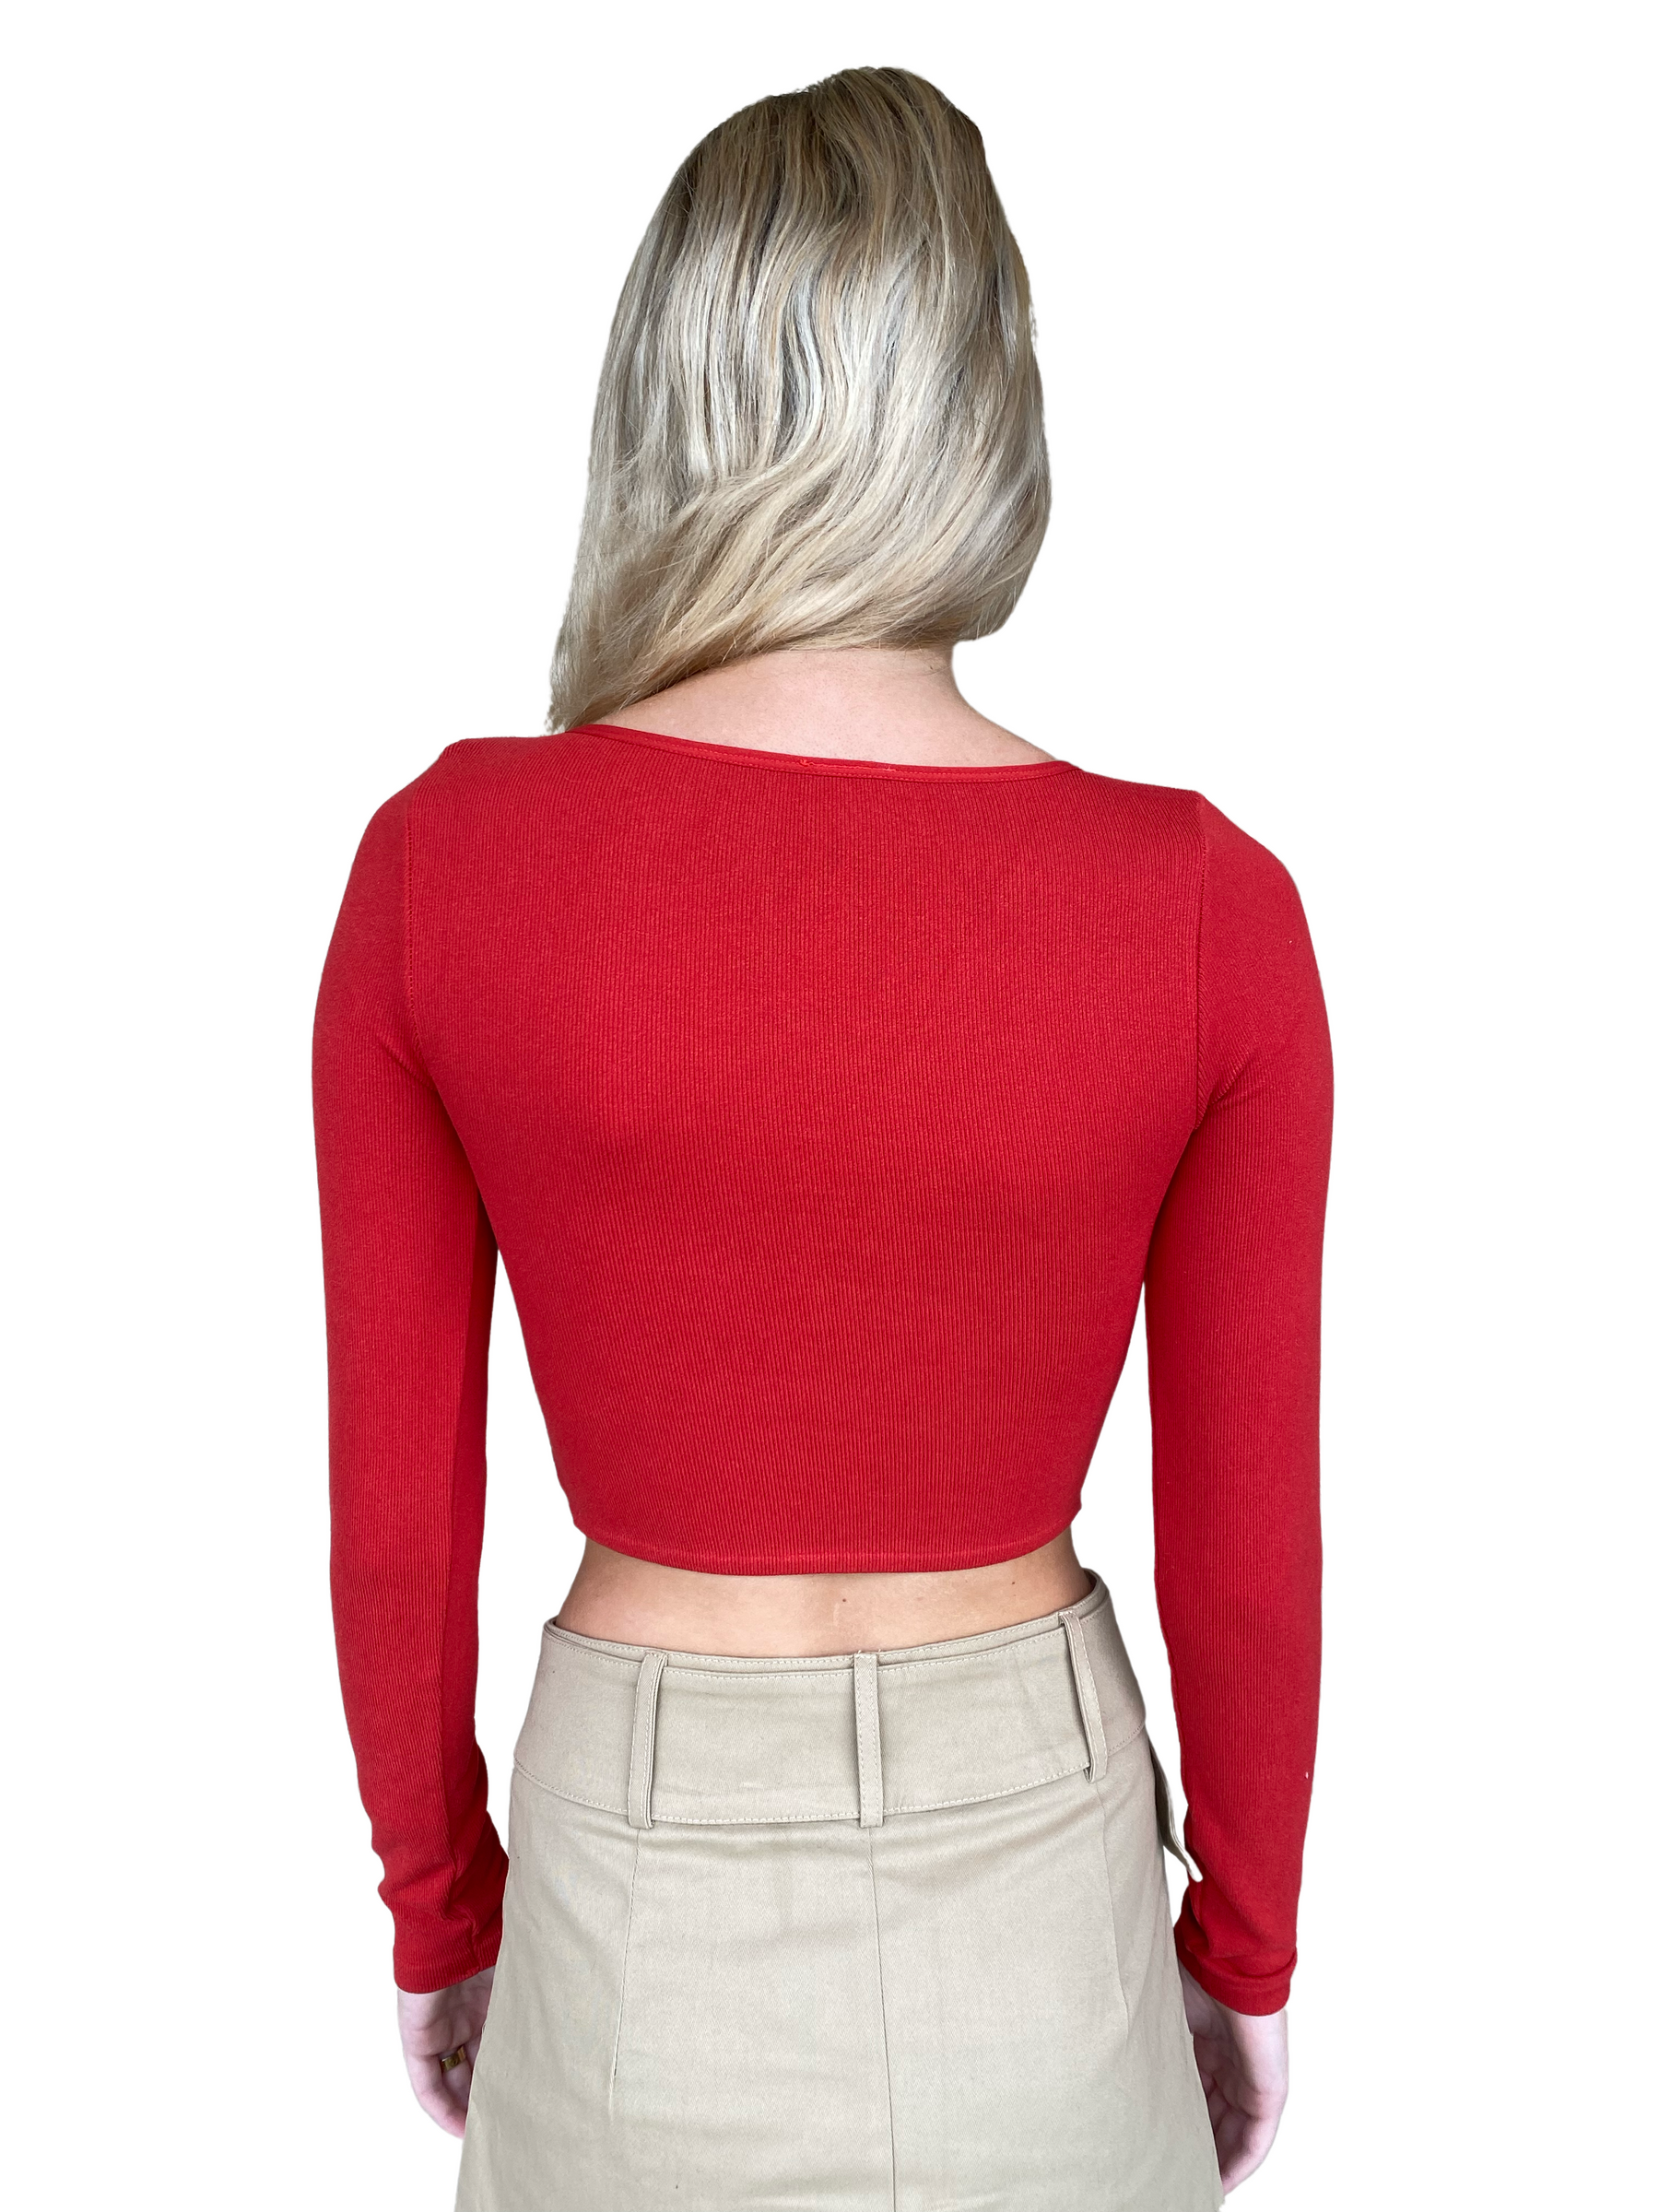 Autumn Long-Sleeve Top - ONFEMME By Lindsey's Kloset